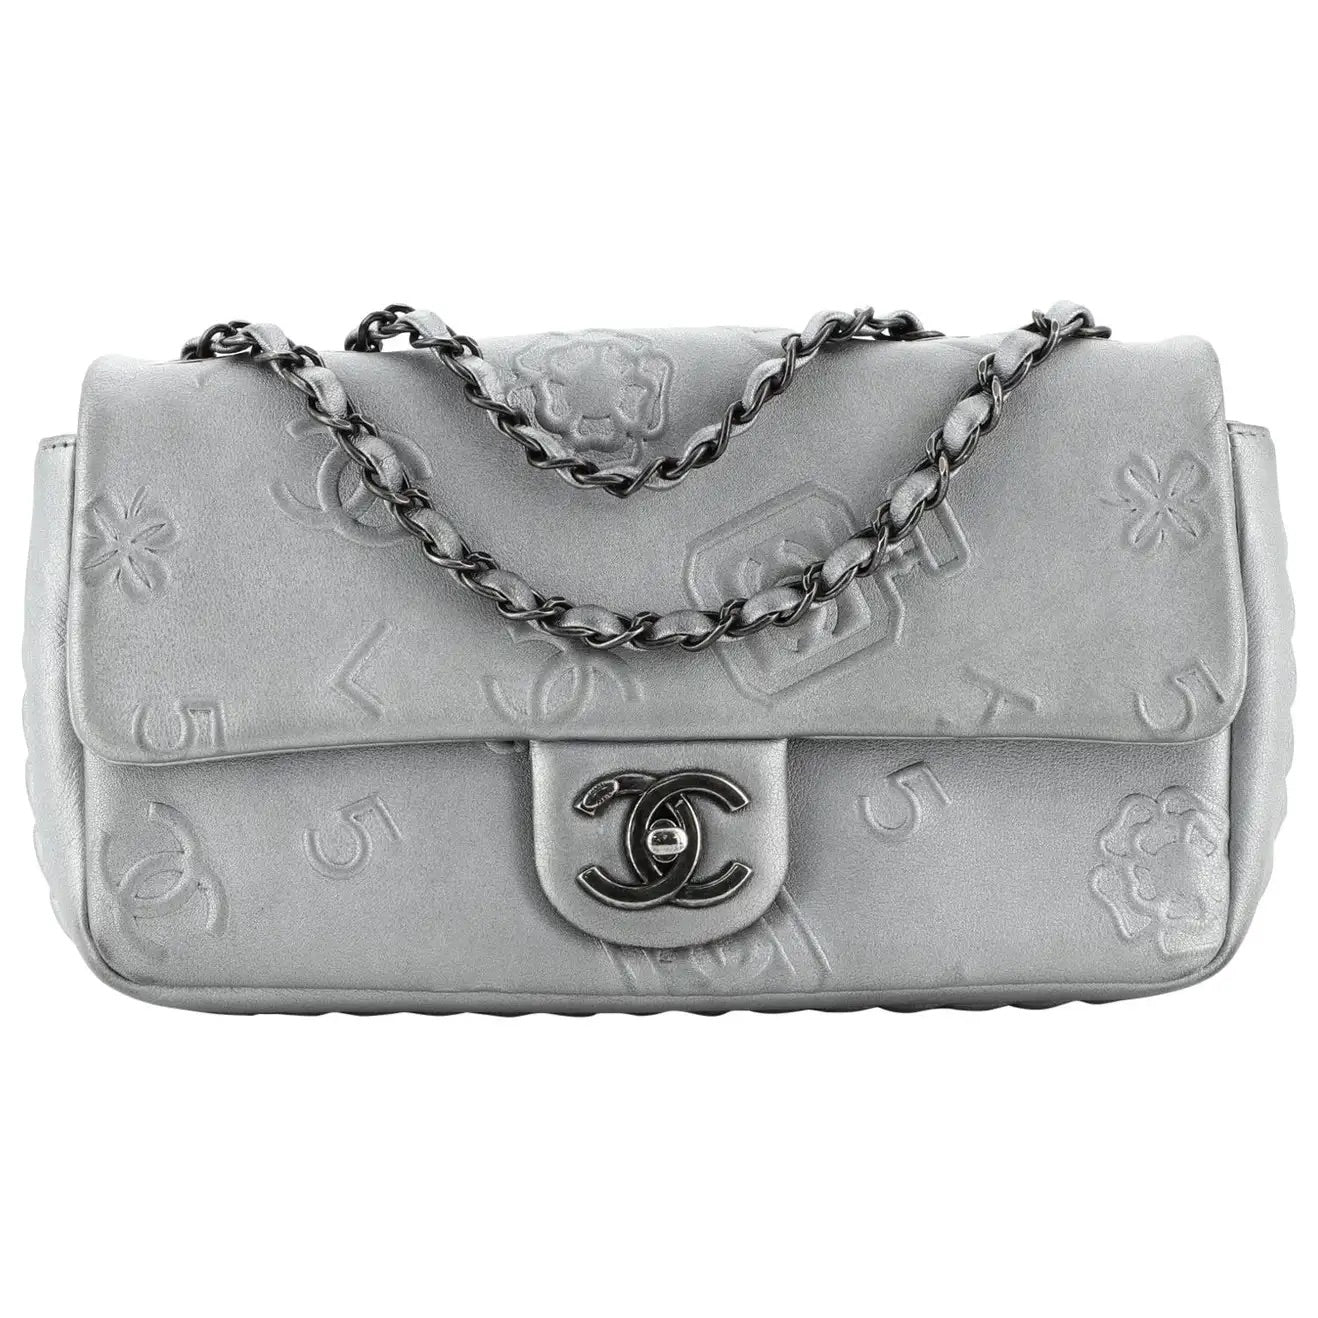 CHANEL Ash And Embossed Bag Of Geometric And CC Shapes  Embossed bag Bags  Chanel bag classic